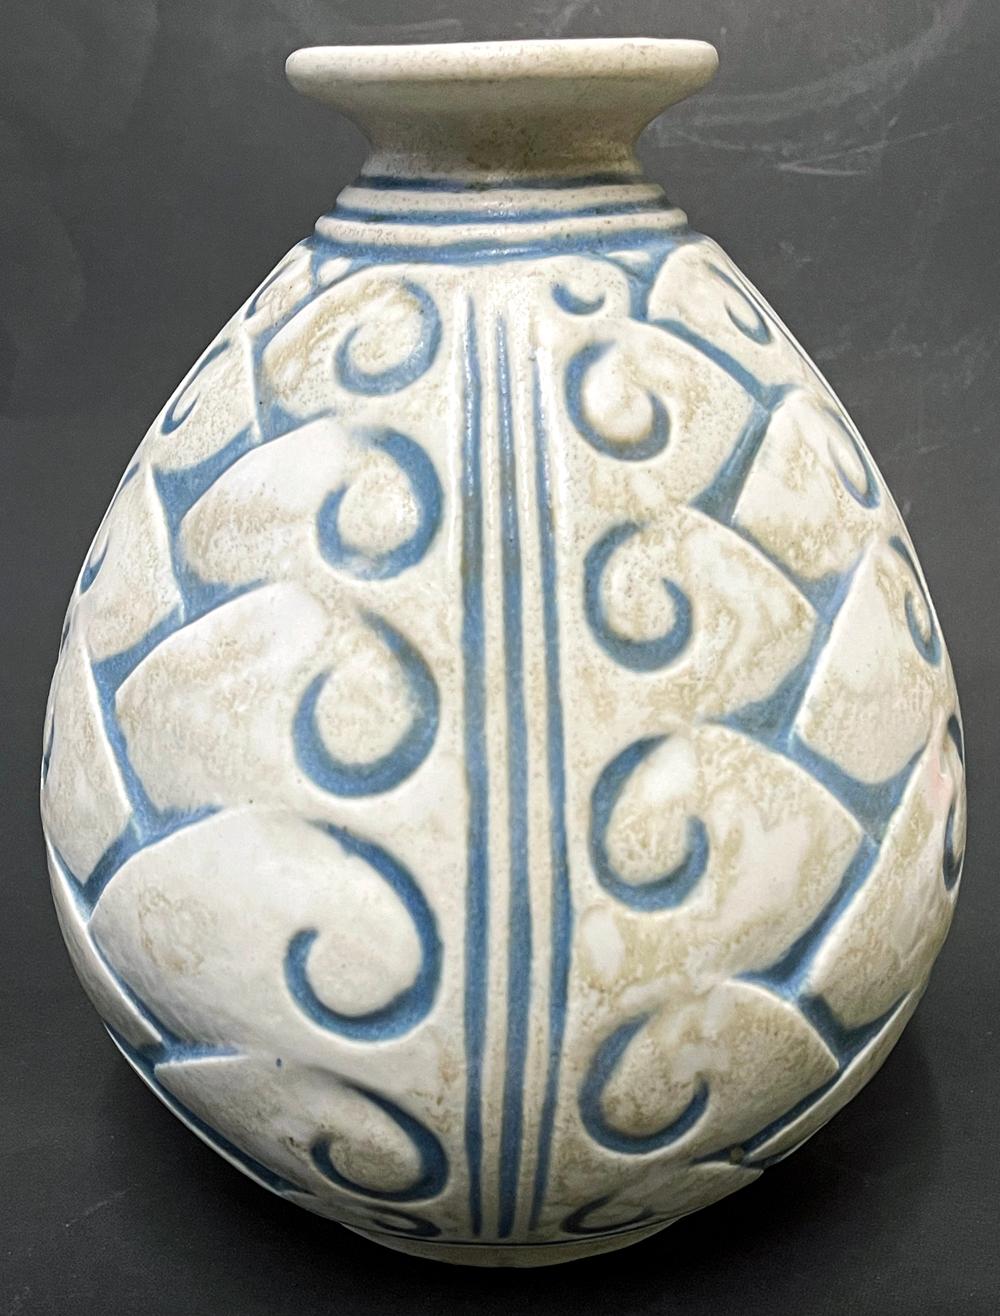 Unusual and striking, this Art Deco vase with stylized foliate forms is glazed in rich, subdued blues and grays, with a mottled effect not unlike the interior of seashells. The vase was produced by Joseph and Pierre Mougin, who were closely